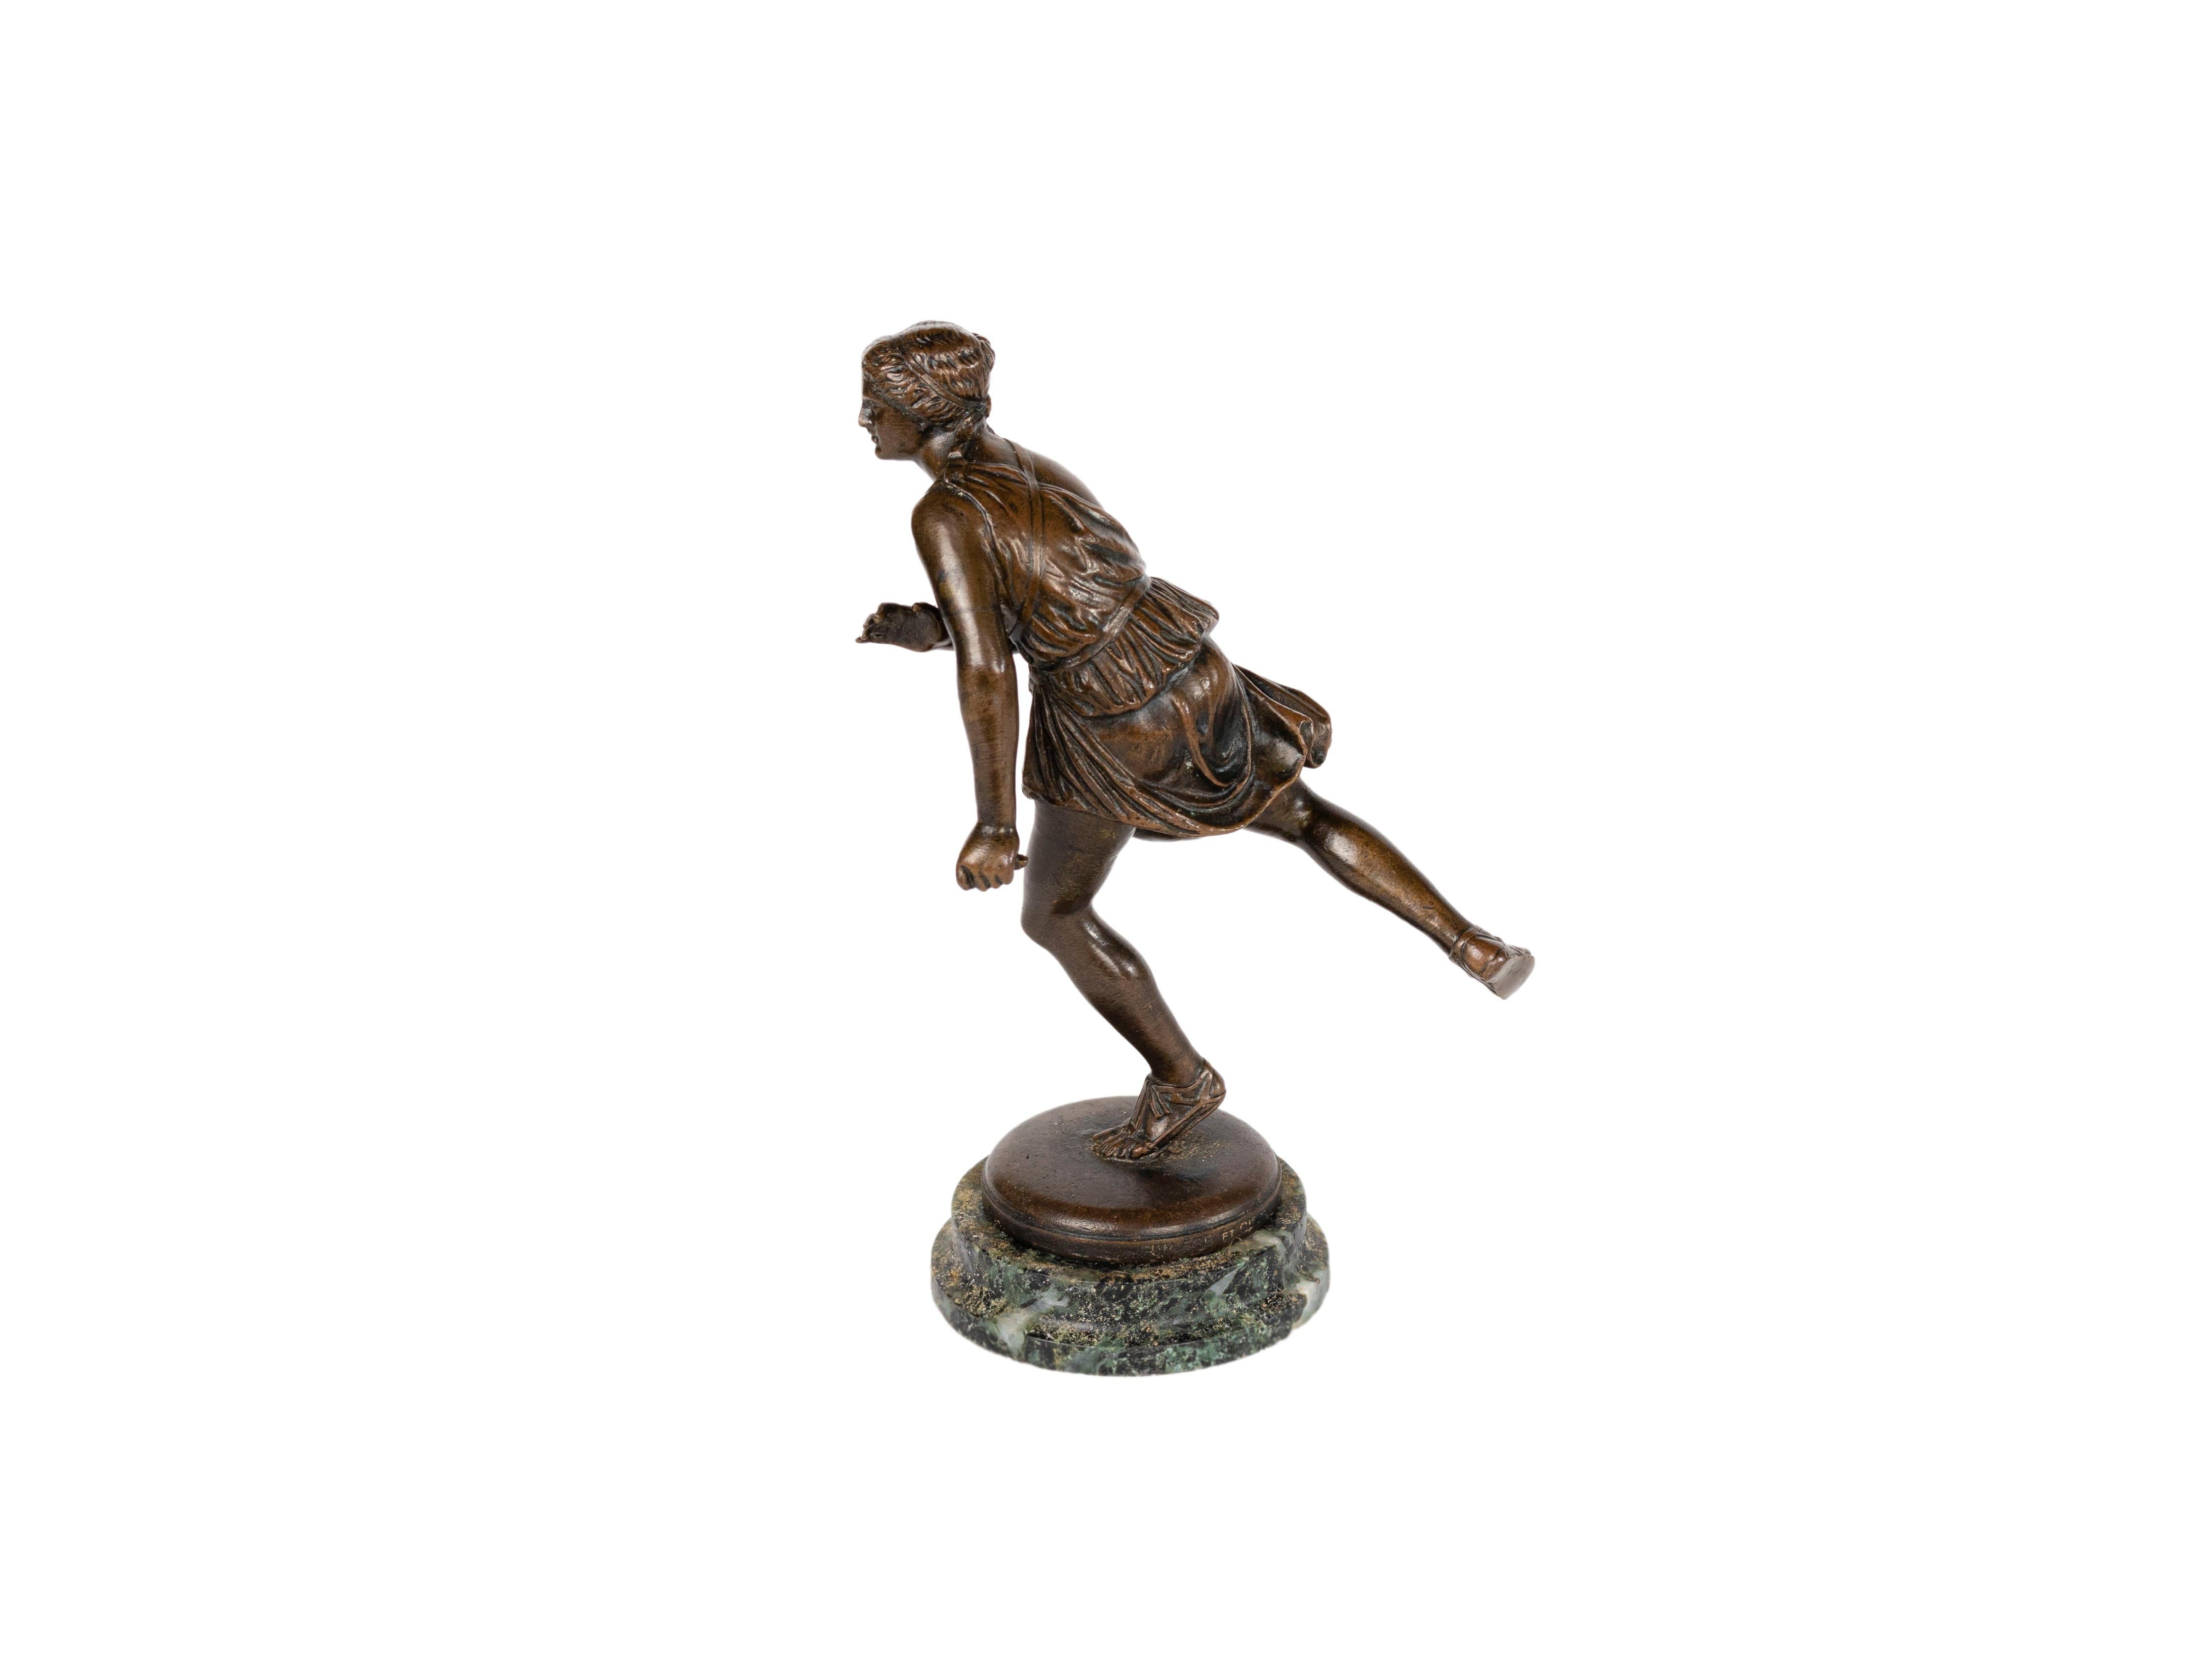 A French bronze figure of Atalanta with a «Fumiere et Cie» mark on the base. 
Atalanta the famous virgin huntress.Atalanta raced all her suitors and outran all but Hippomenes, who defeated her by cunning, not speed. 
The piece is from the world